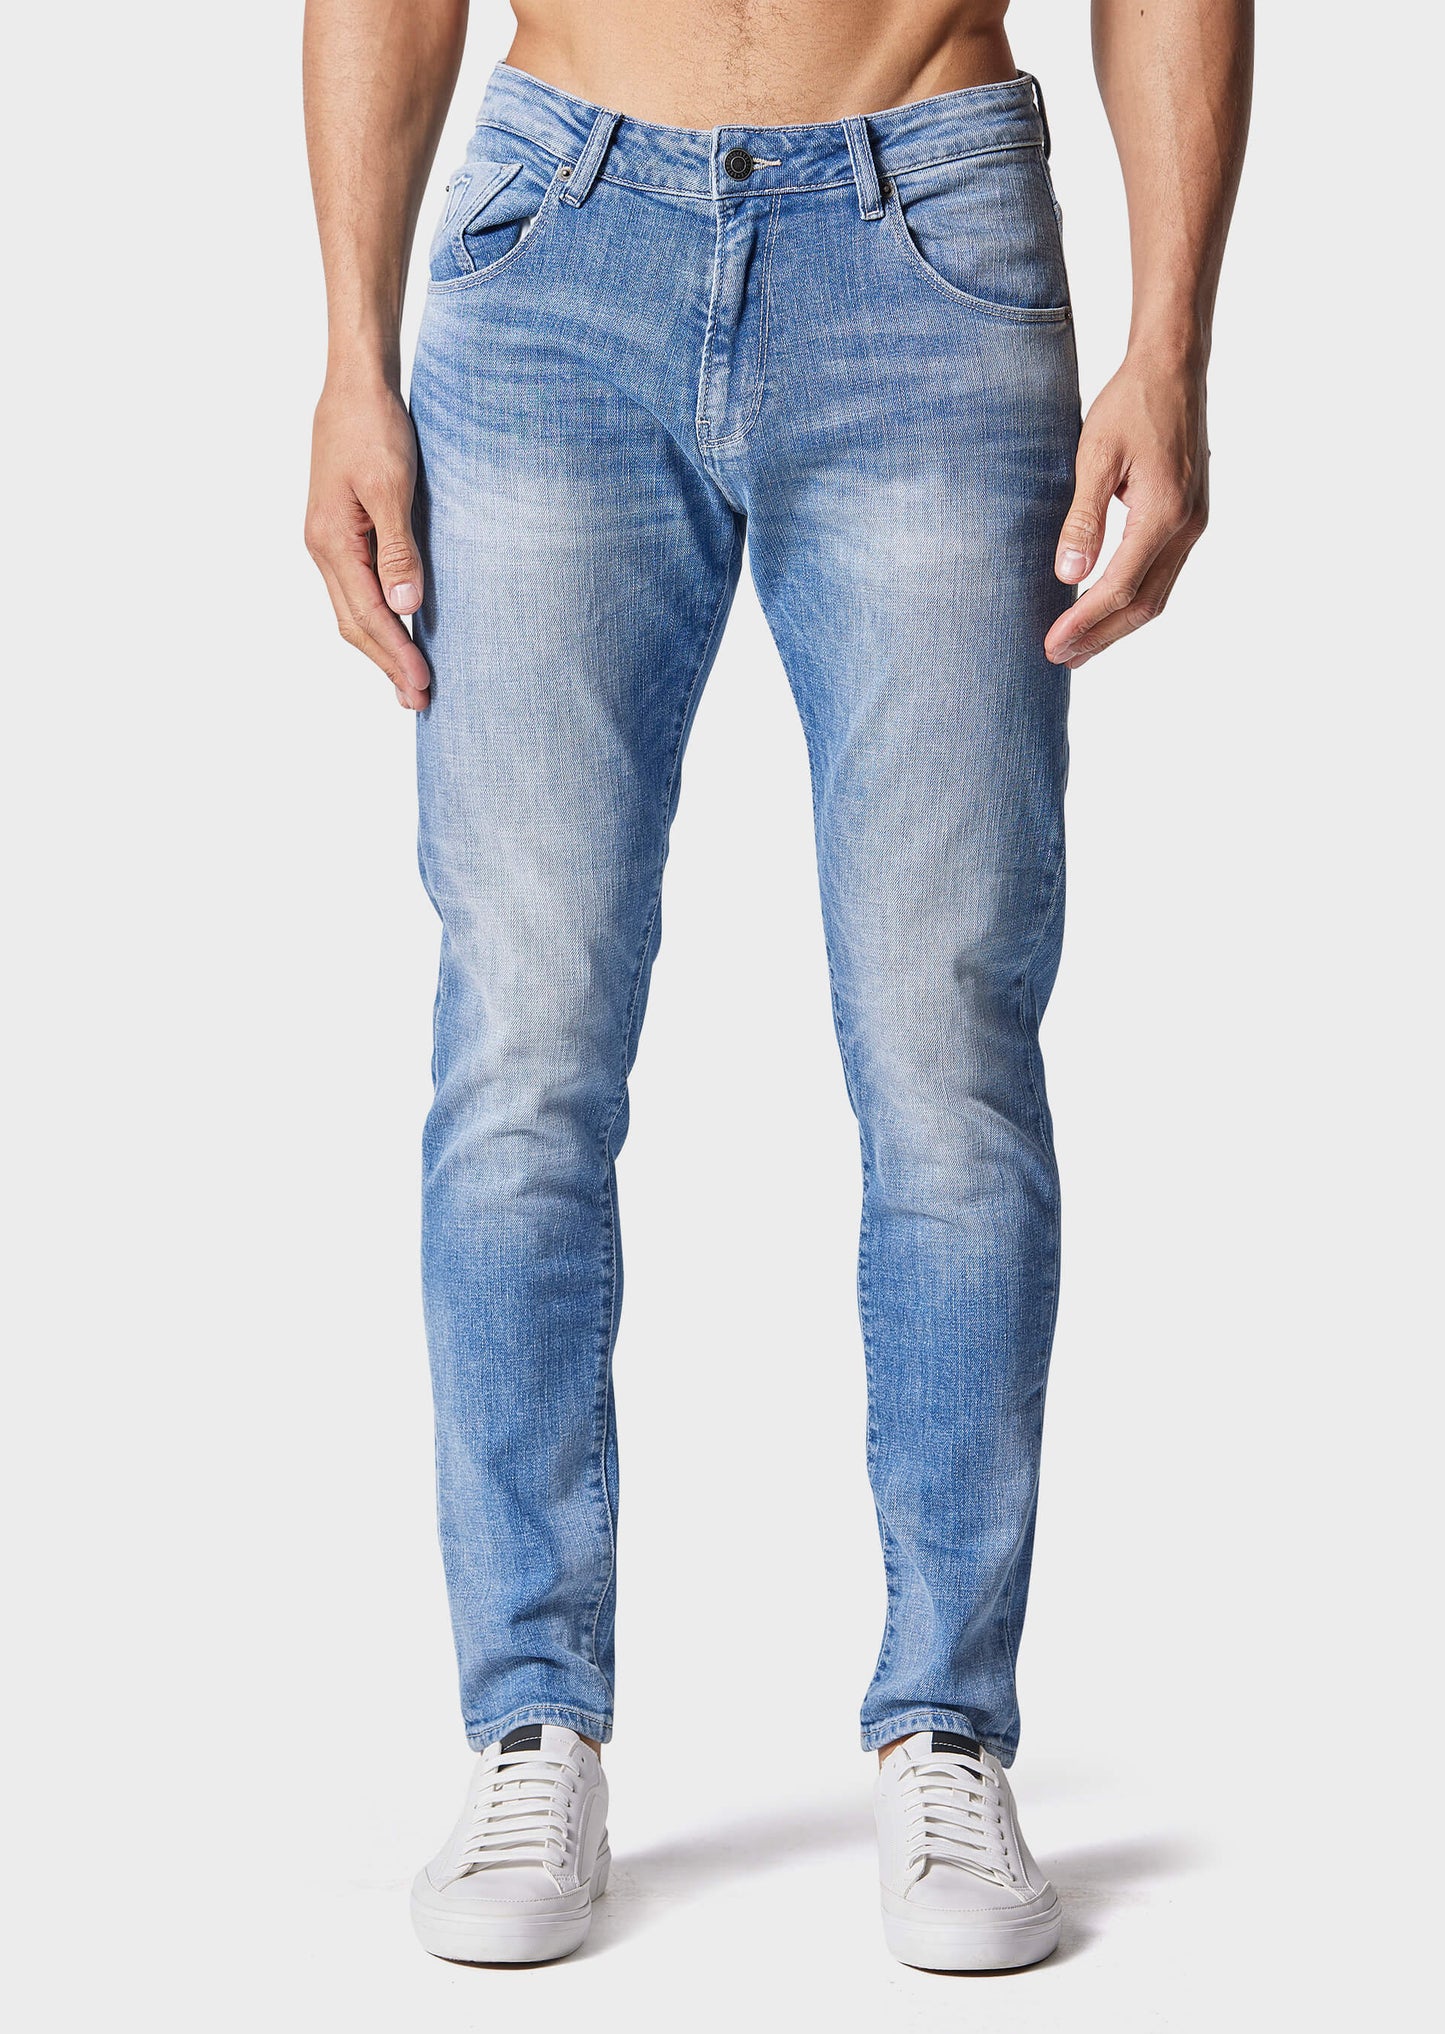 Moriarty LAK 918 Slim Fit Jeans